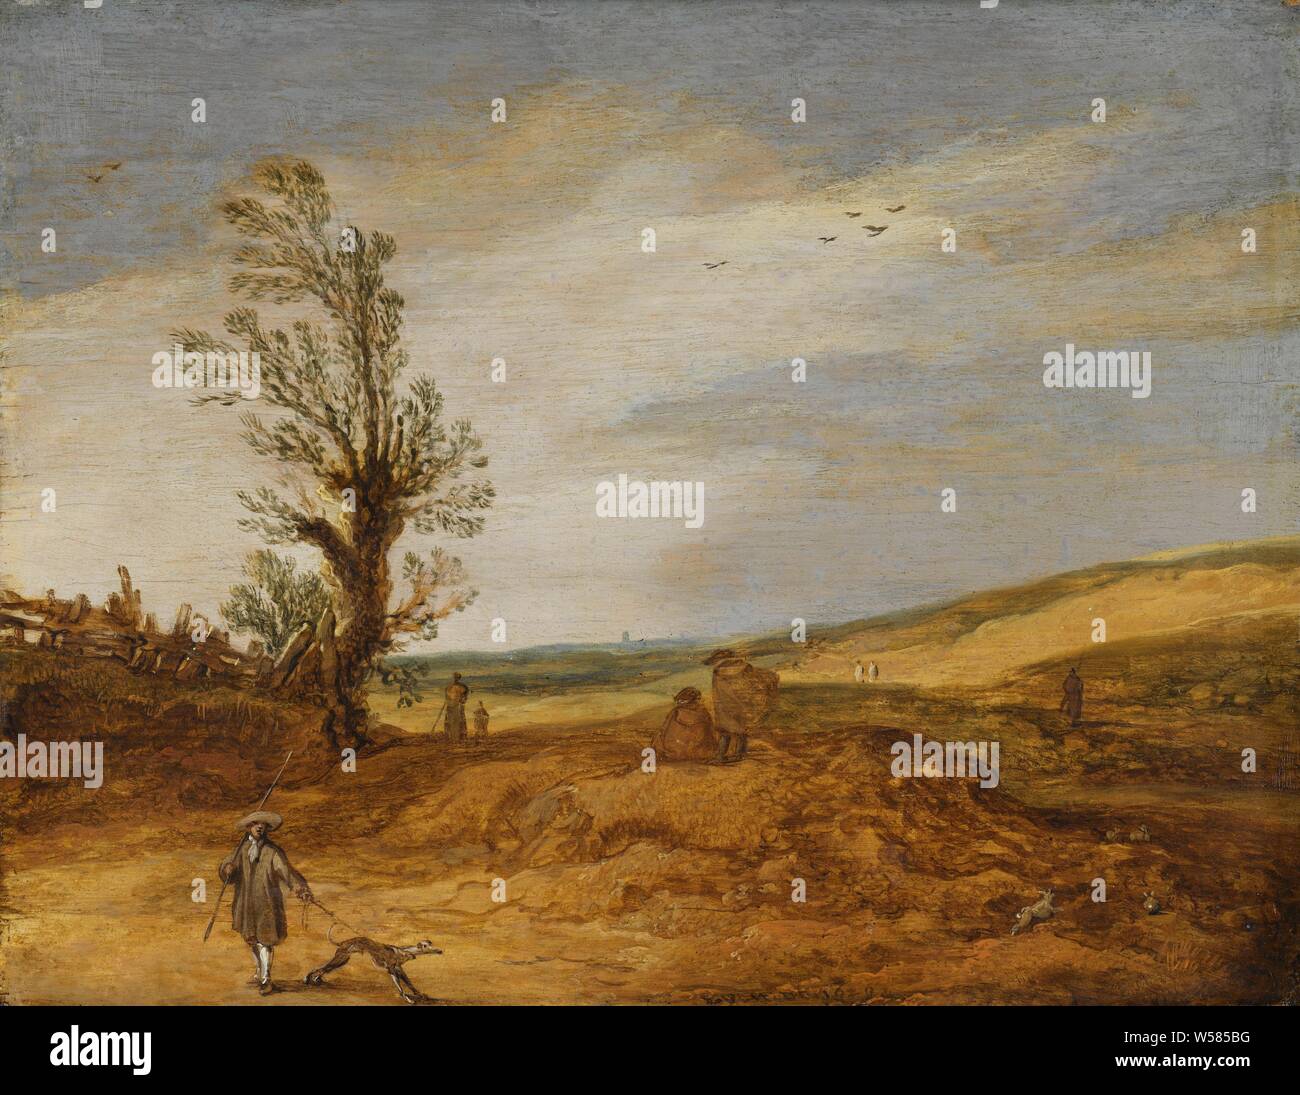 A View in the Dunes, Dune landscape with various figures on and along a country road. In the foreground a man with a dog lurking for a leaping hare., Esaias van de Velde, 1629, panel, oil paint (paint), support: h 17.7 cm × w 22.7 cm d 4.6 cm Stock Photo